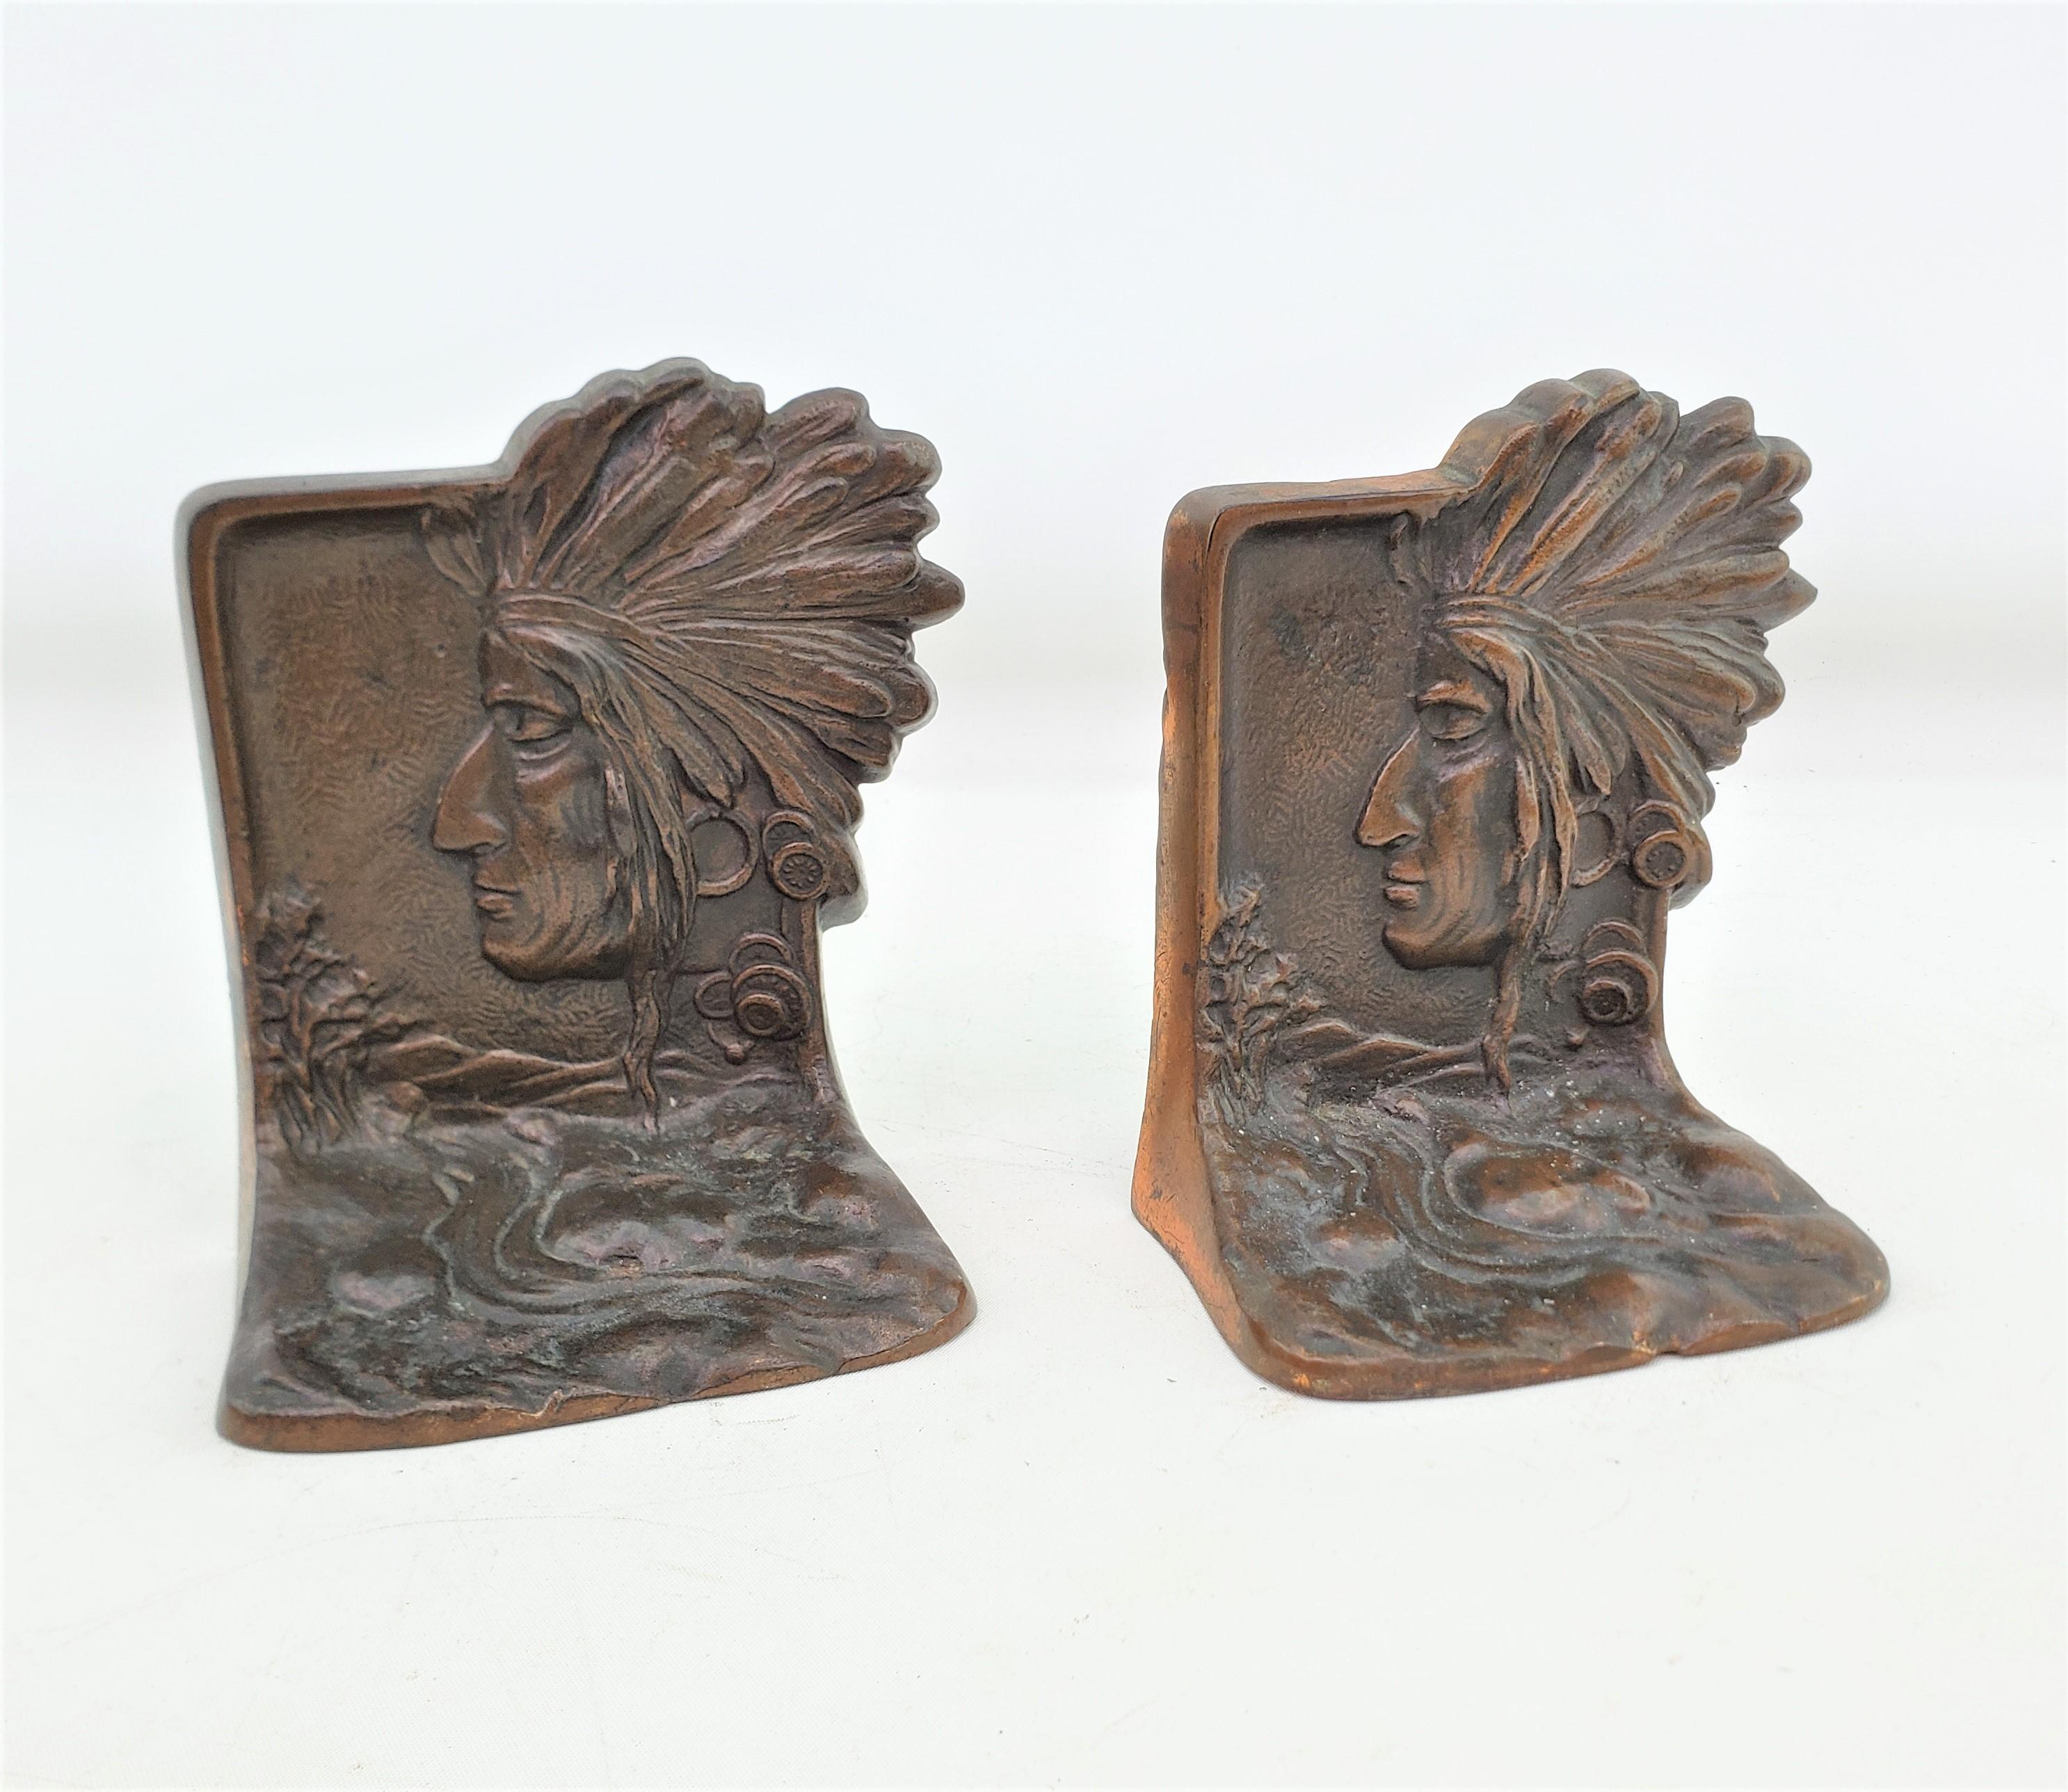 This pair of antique bookends are unsigned, but presumed to have originated from the United States and date to approximately 1920 and done in the period Art Deco style. The bookends are composed of cast steel with a bronze patination and depict the